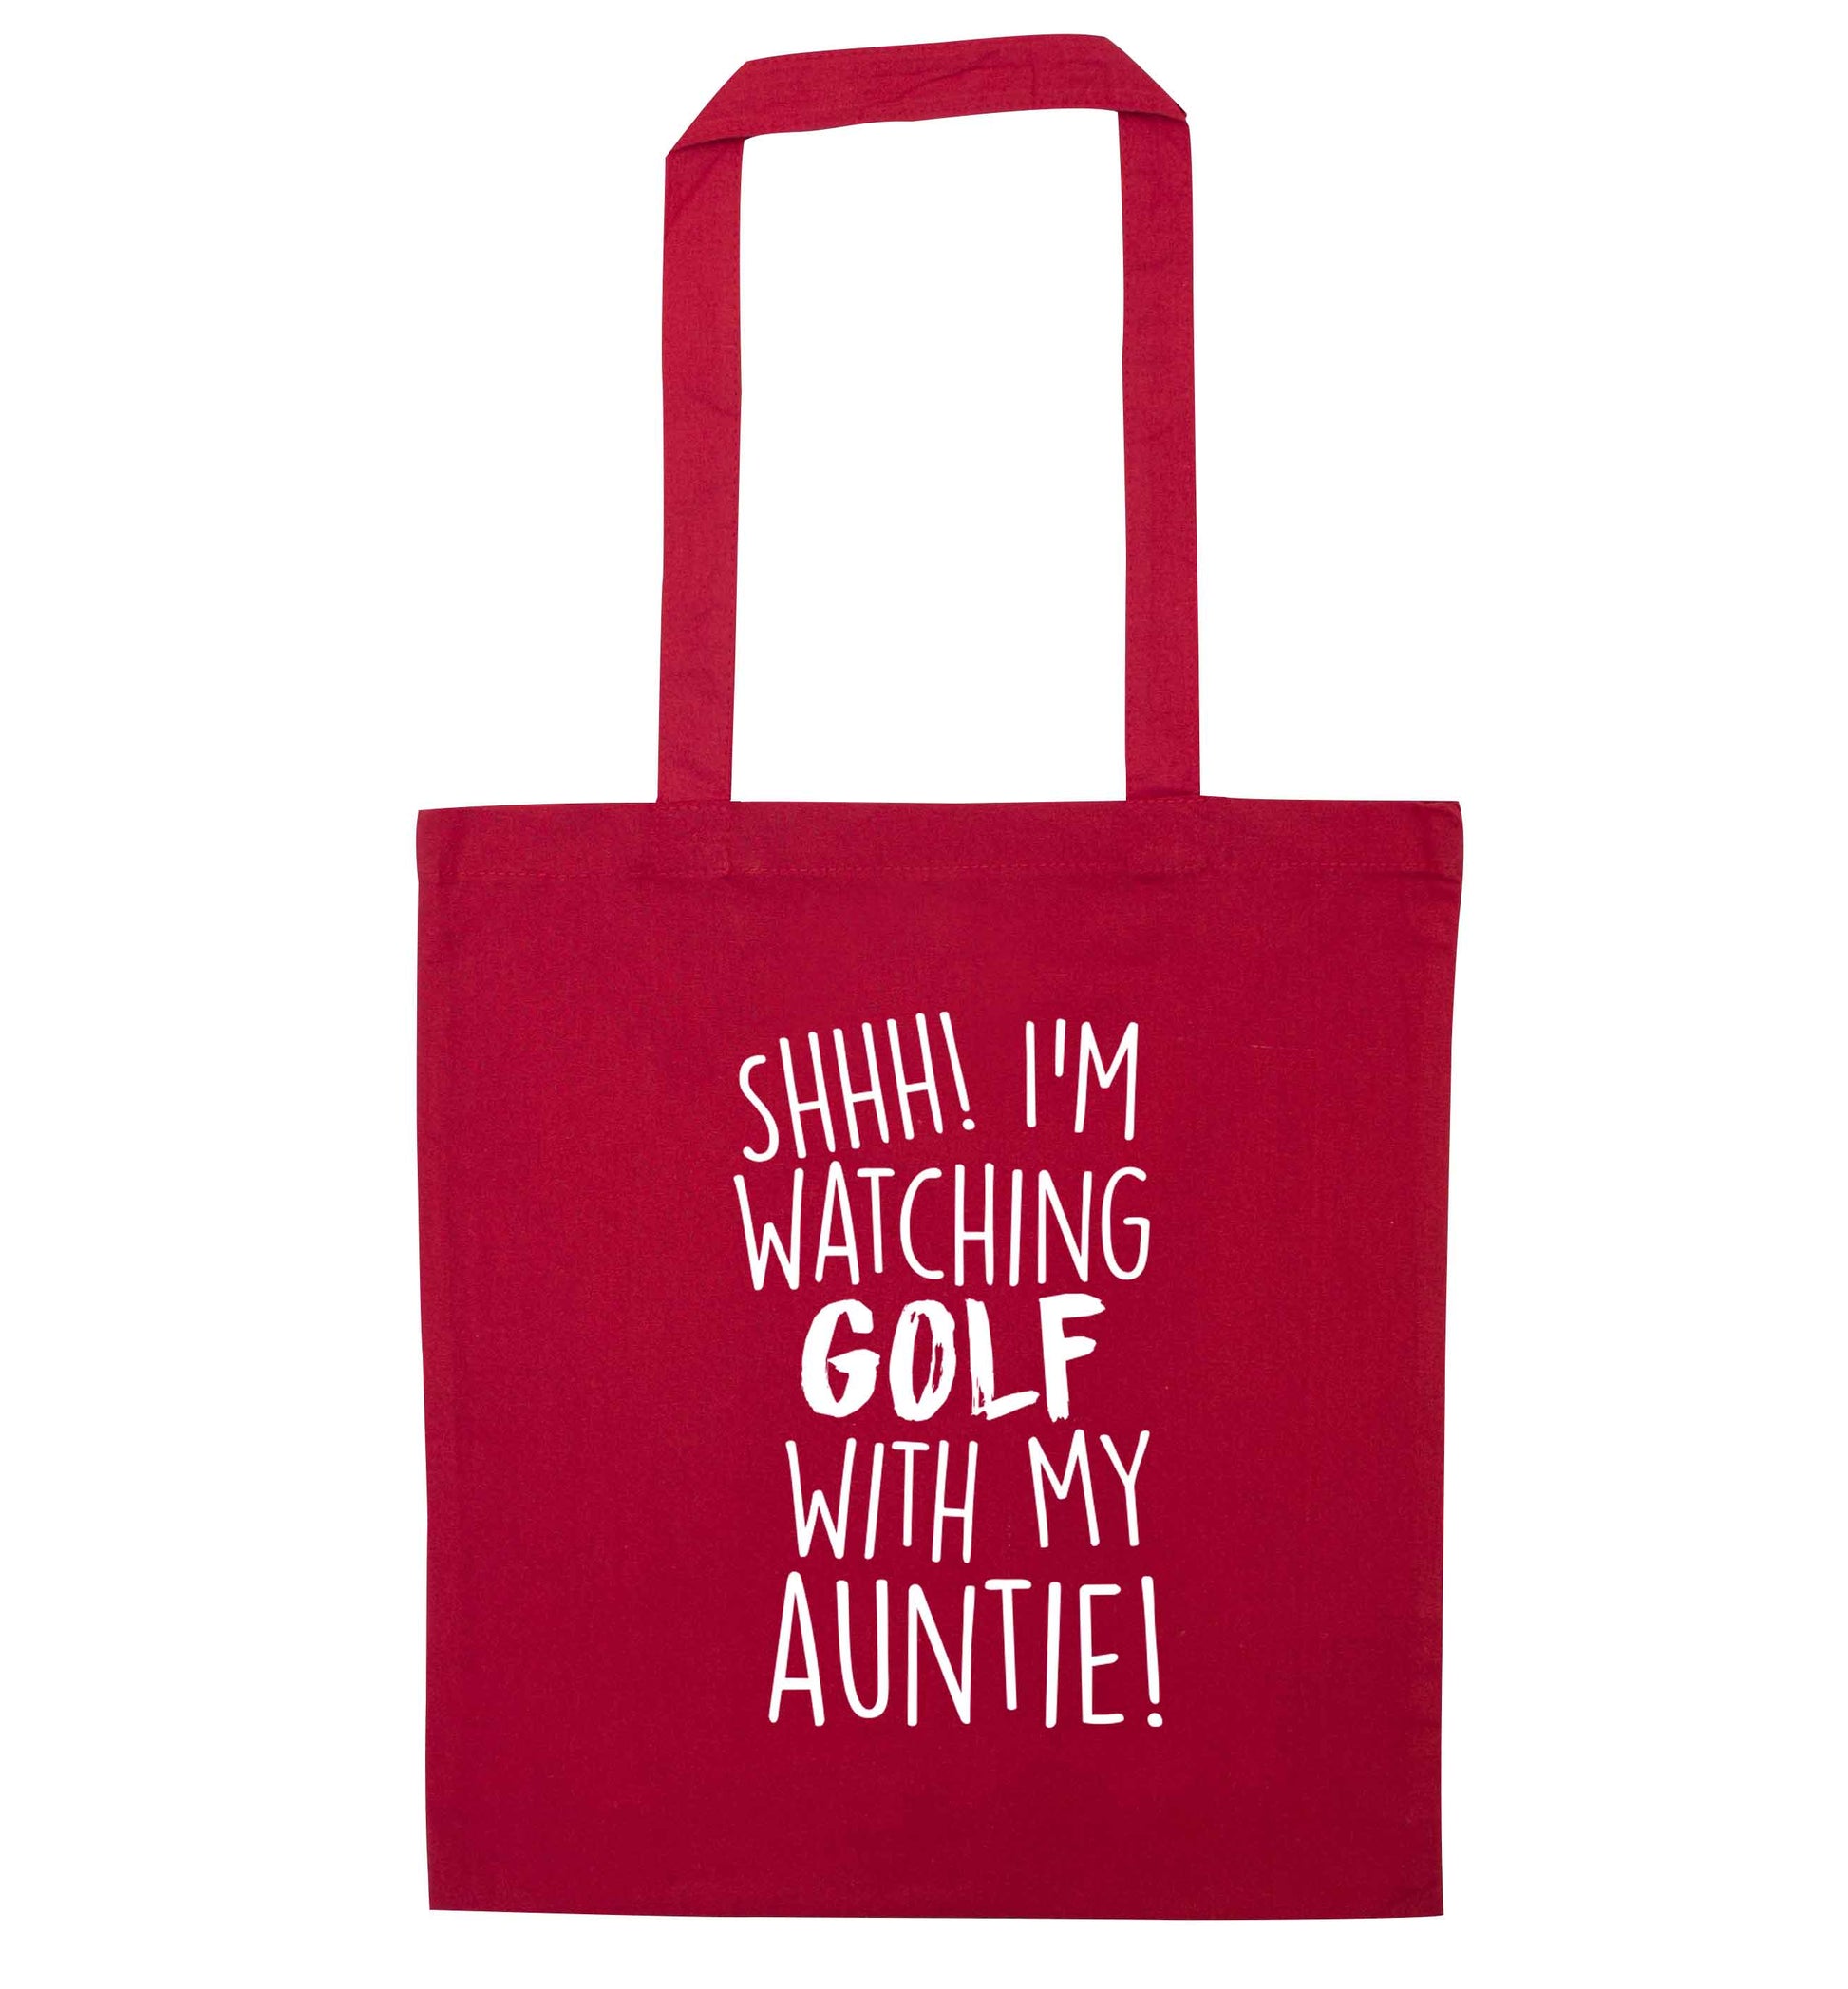 Shh I'm watching golf with my auntie red tote bag